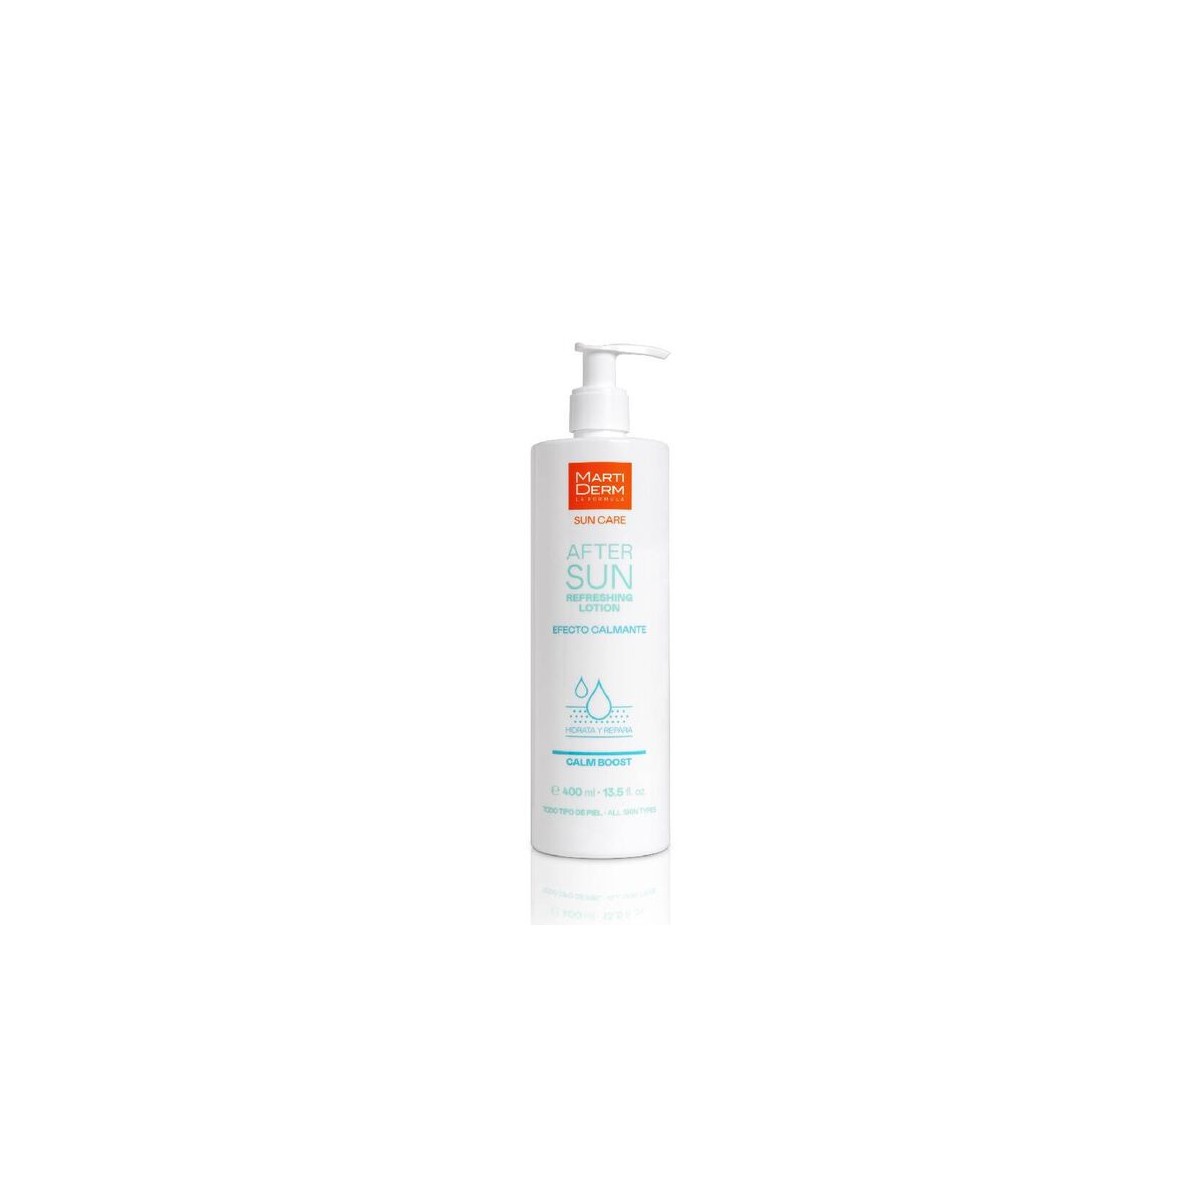 Martiderm After Sun Lotion 400 ml